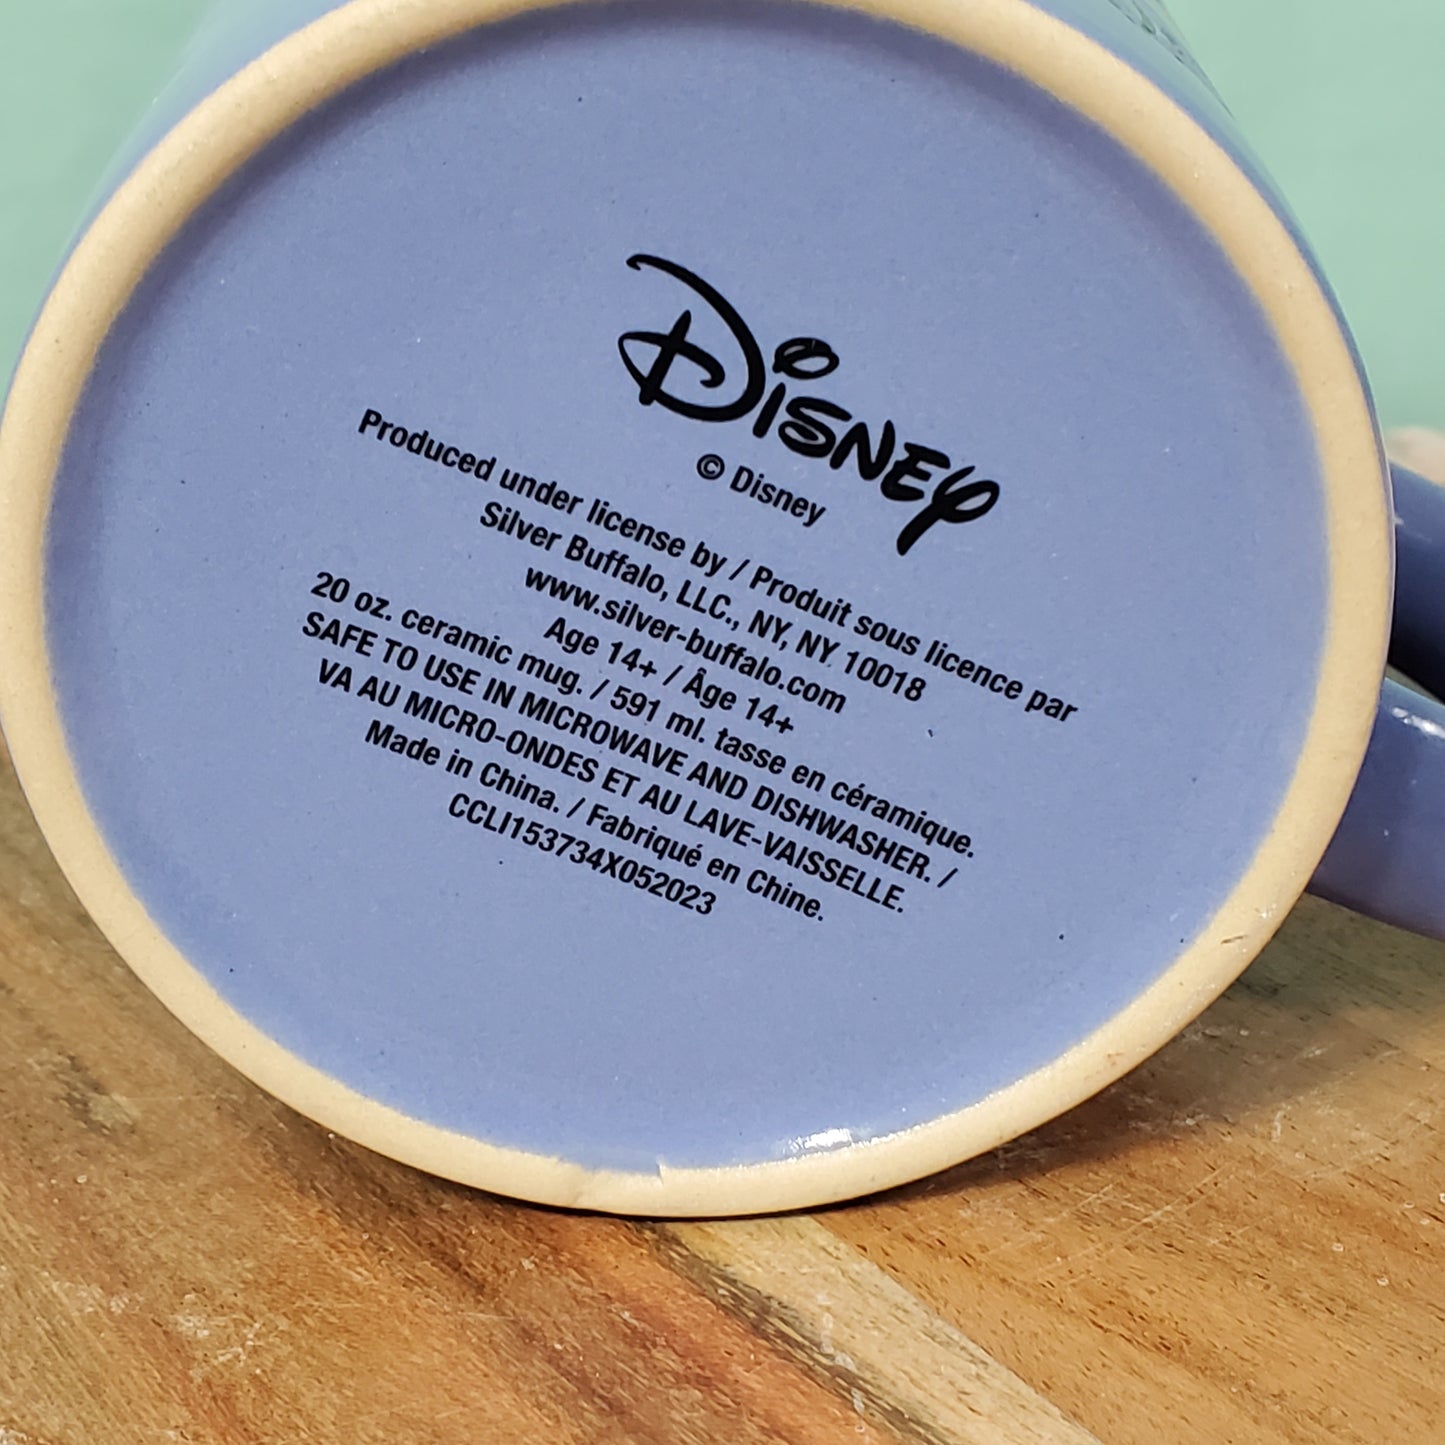 Disney Stitch Double-Sided Blue Mug - Charming Collectible